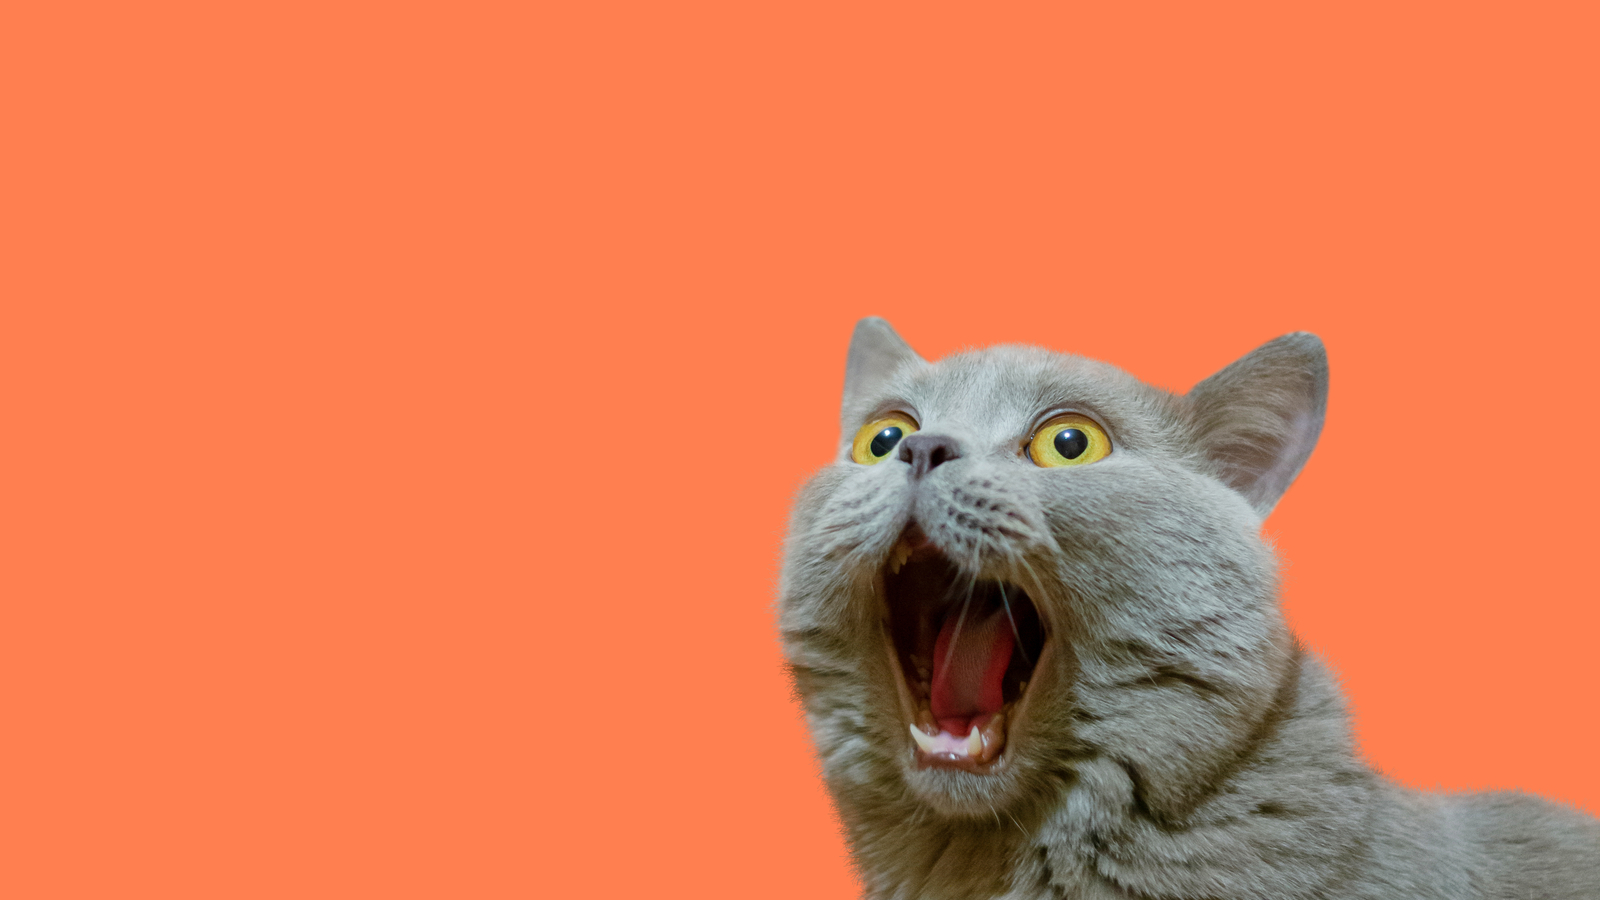 gray cat with yellow eyes and funny surprised expression against an orange background